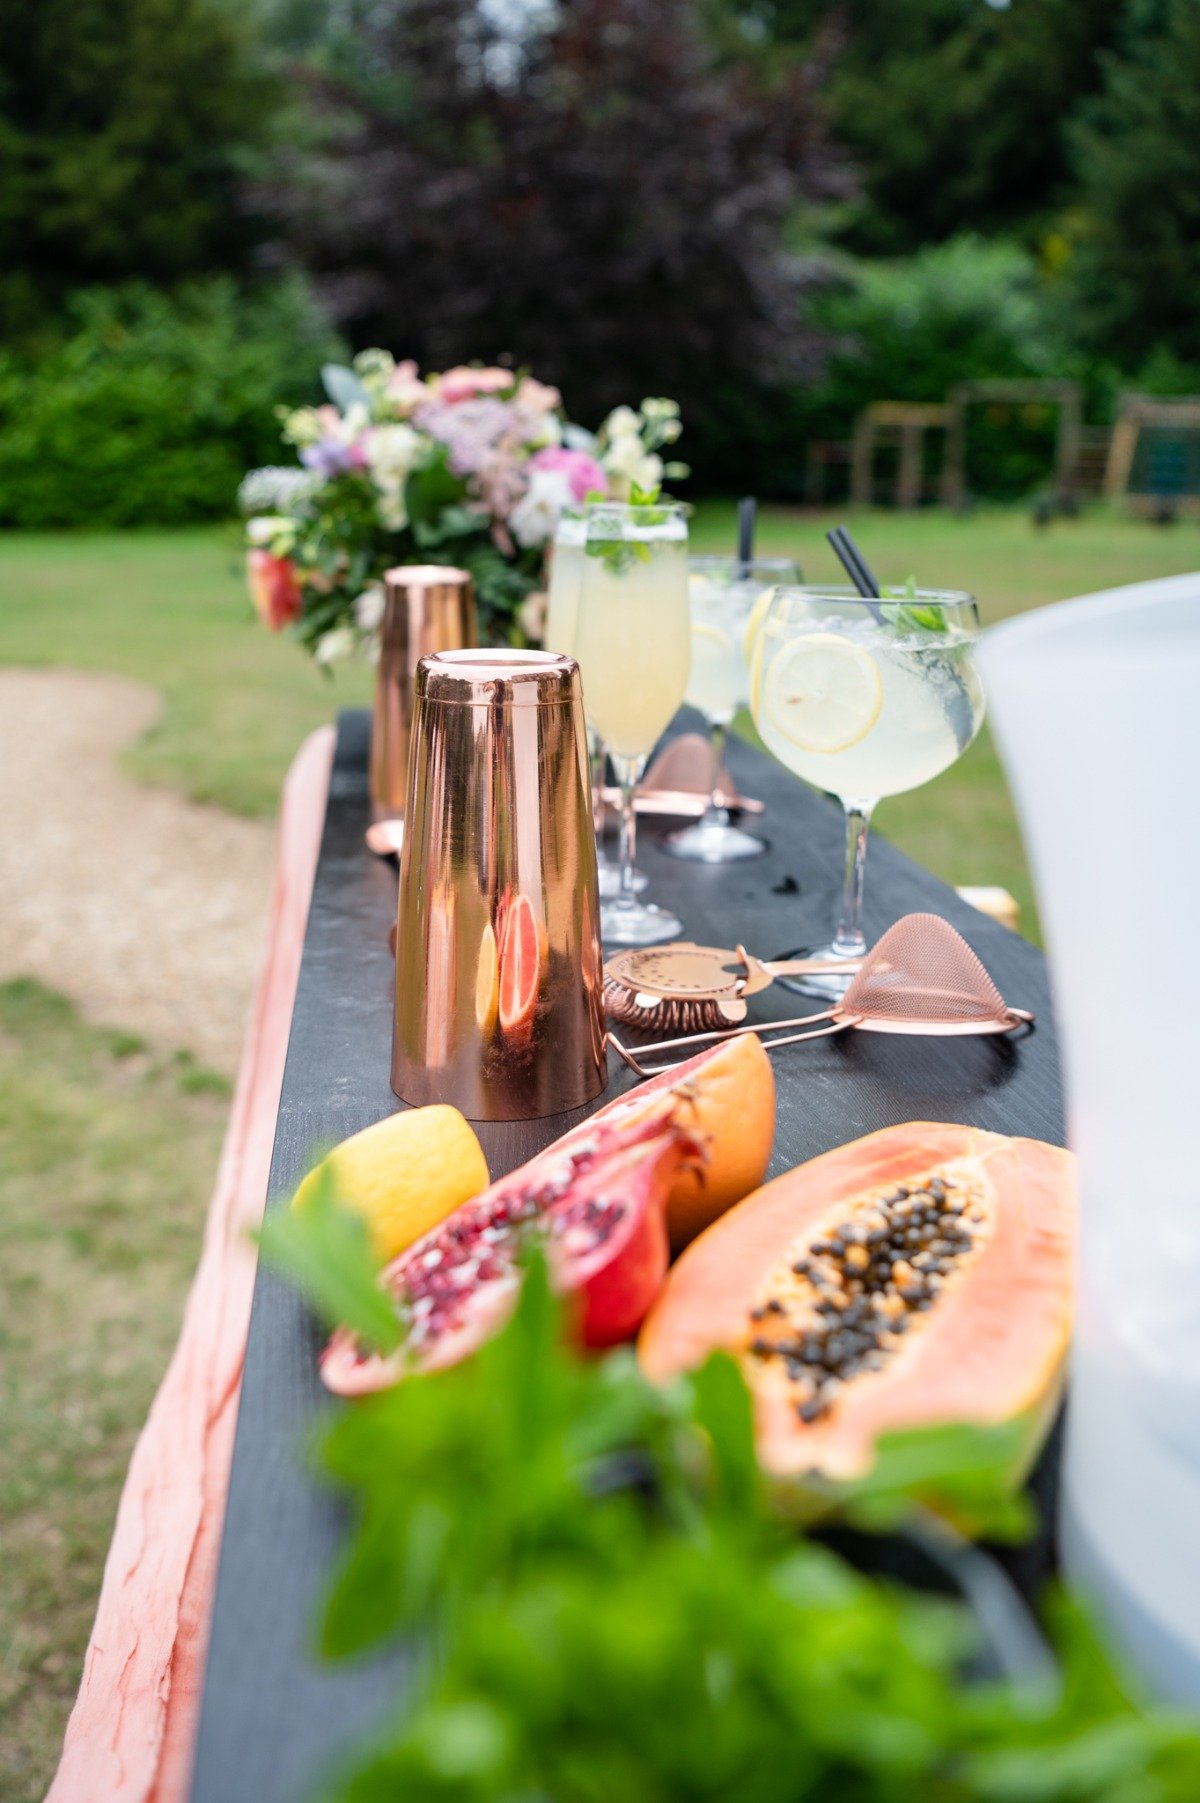  Swanbourne House Summer Styled Shoot